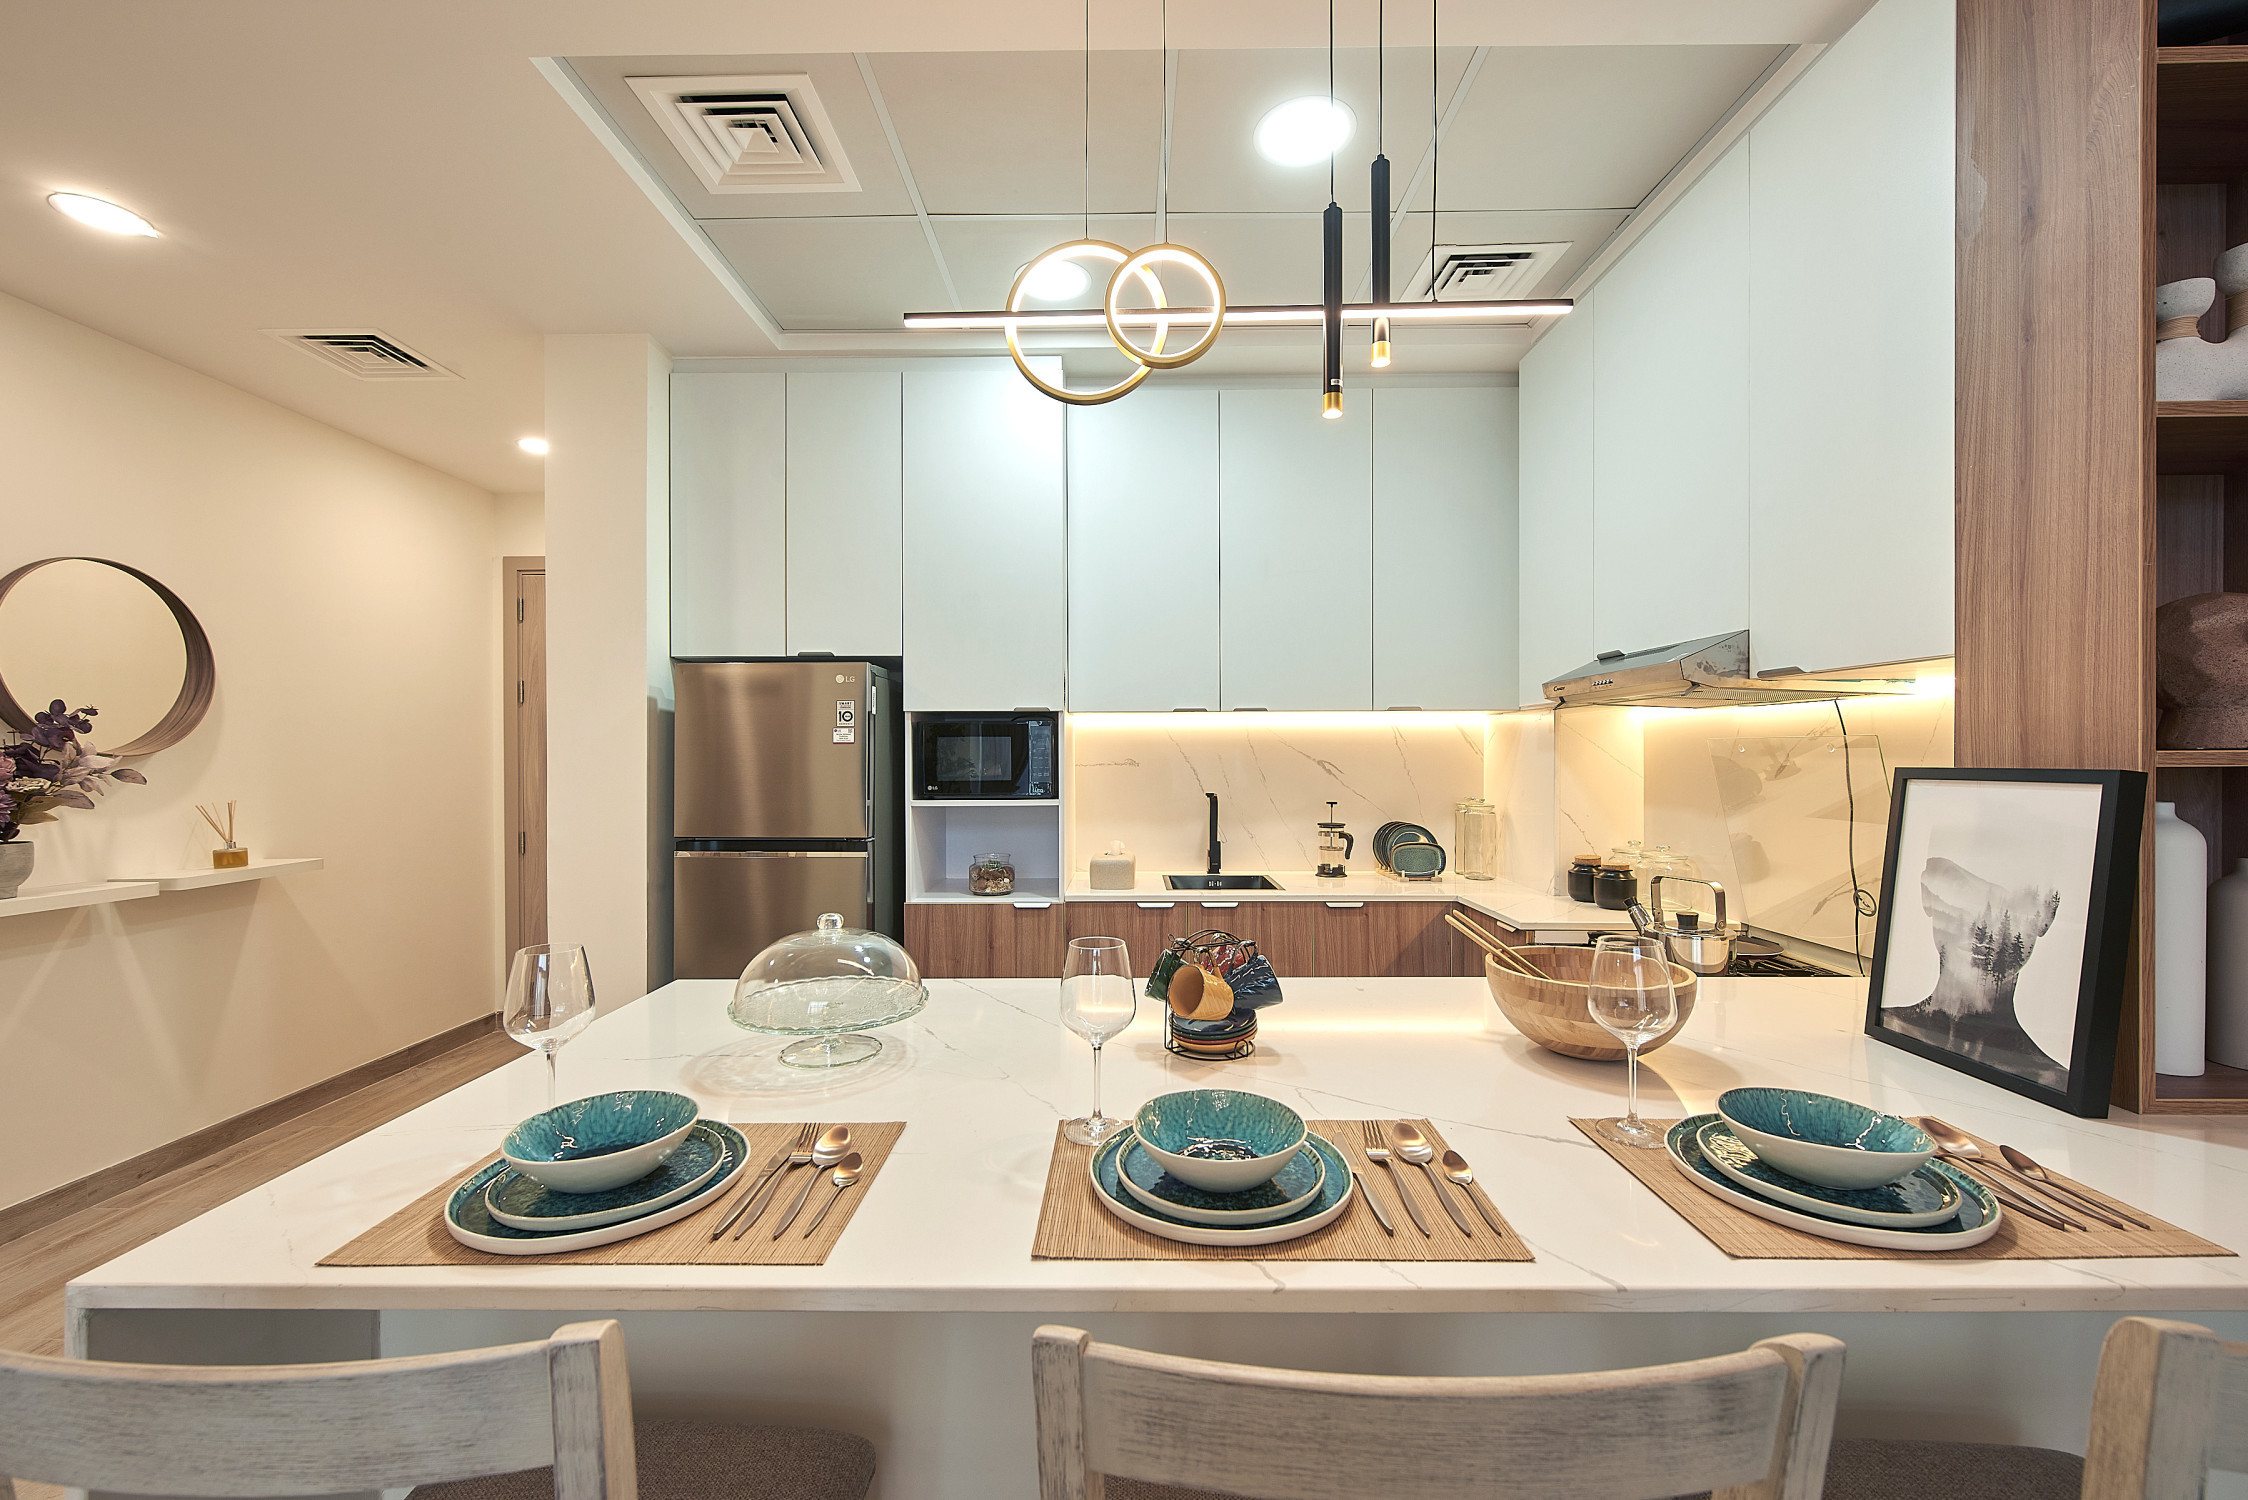 dining kitchen view - Immobilier Dubai